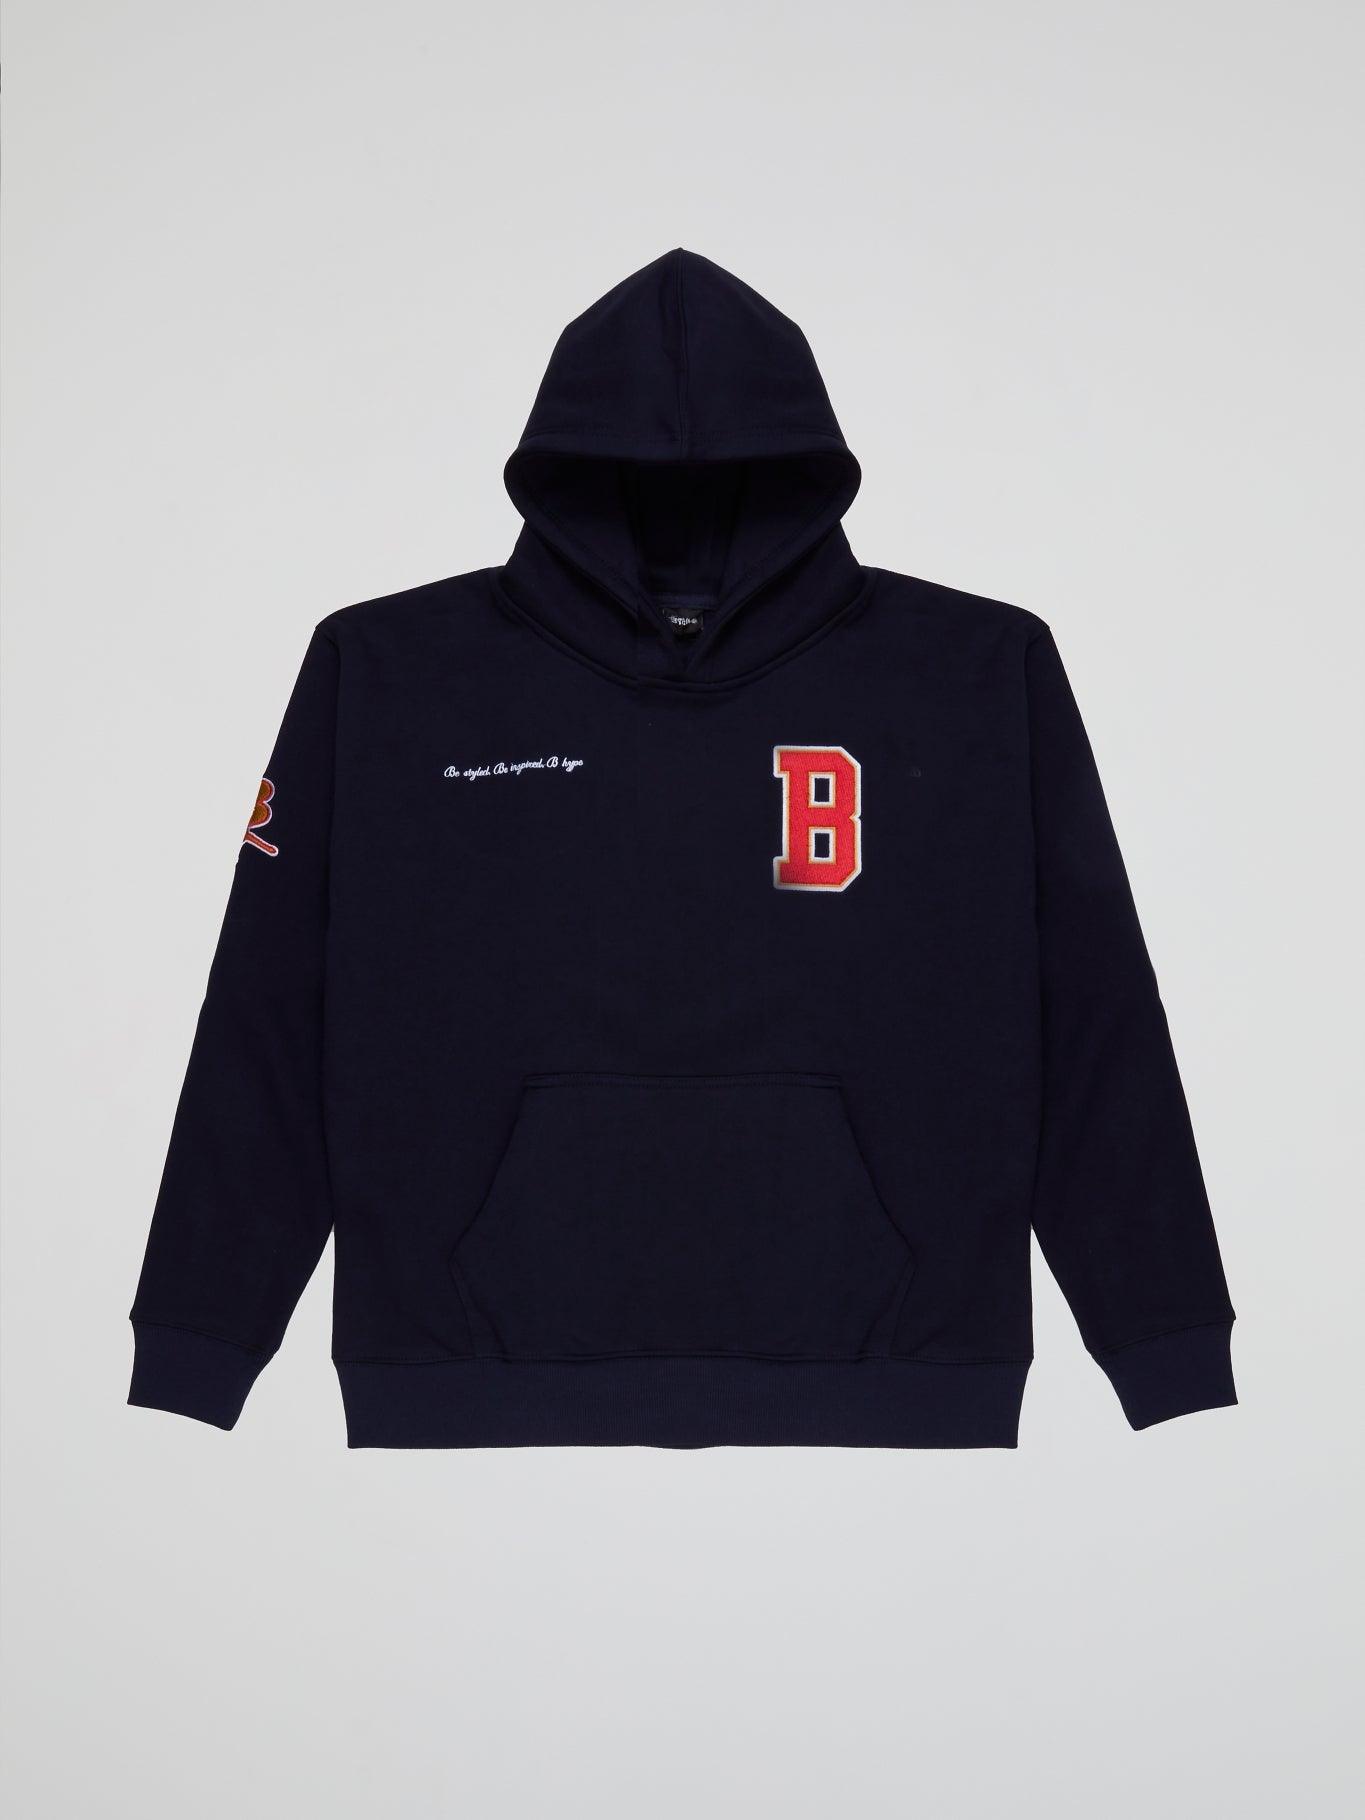 BHYPE MARINE BLUE HOODIE VARSITY COLLECTION - B-Hype Society